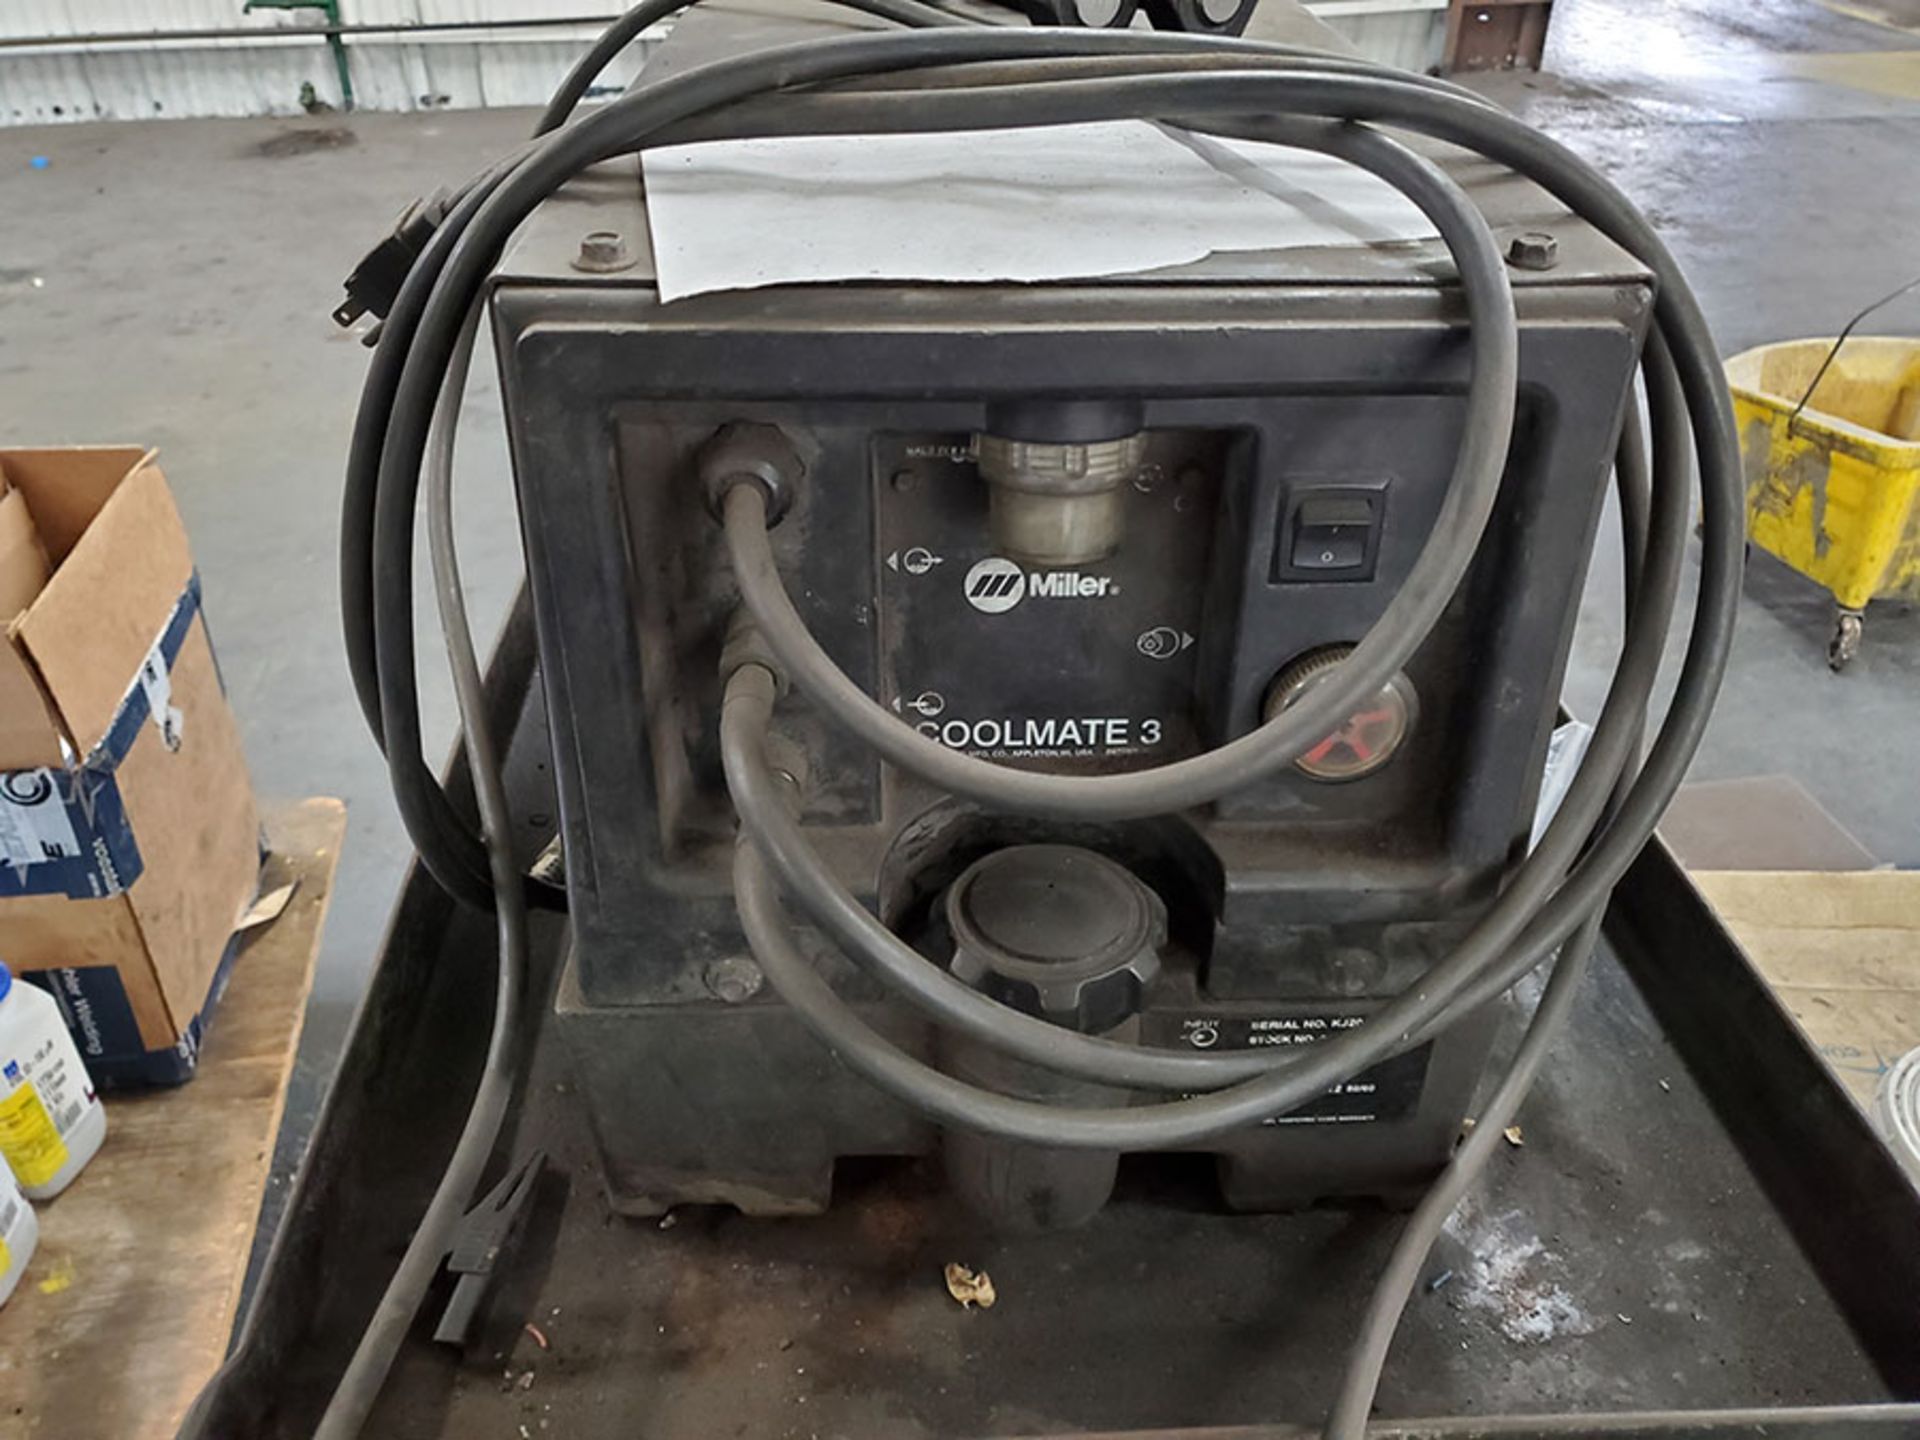 (4) CARTS WITH MILLER COOLMATE 3 CHILLER, PLASMA POWDER, POWDER FEED CONTAINER, LAPMASTER 0006, - Image 5 of 10